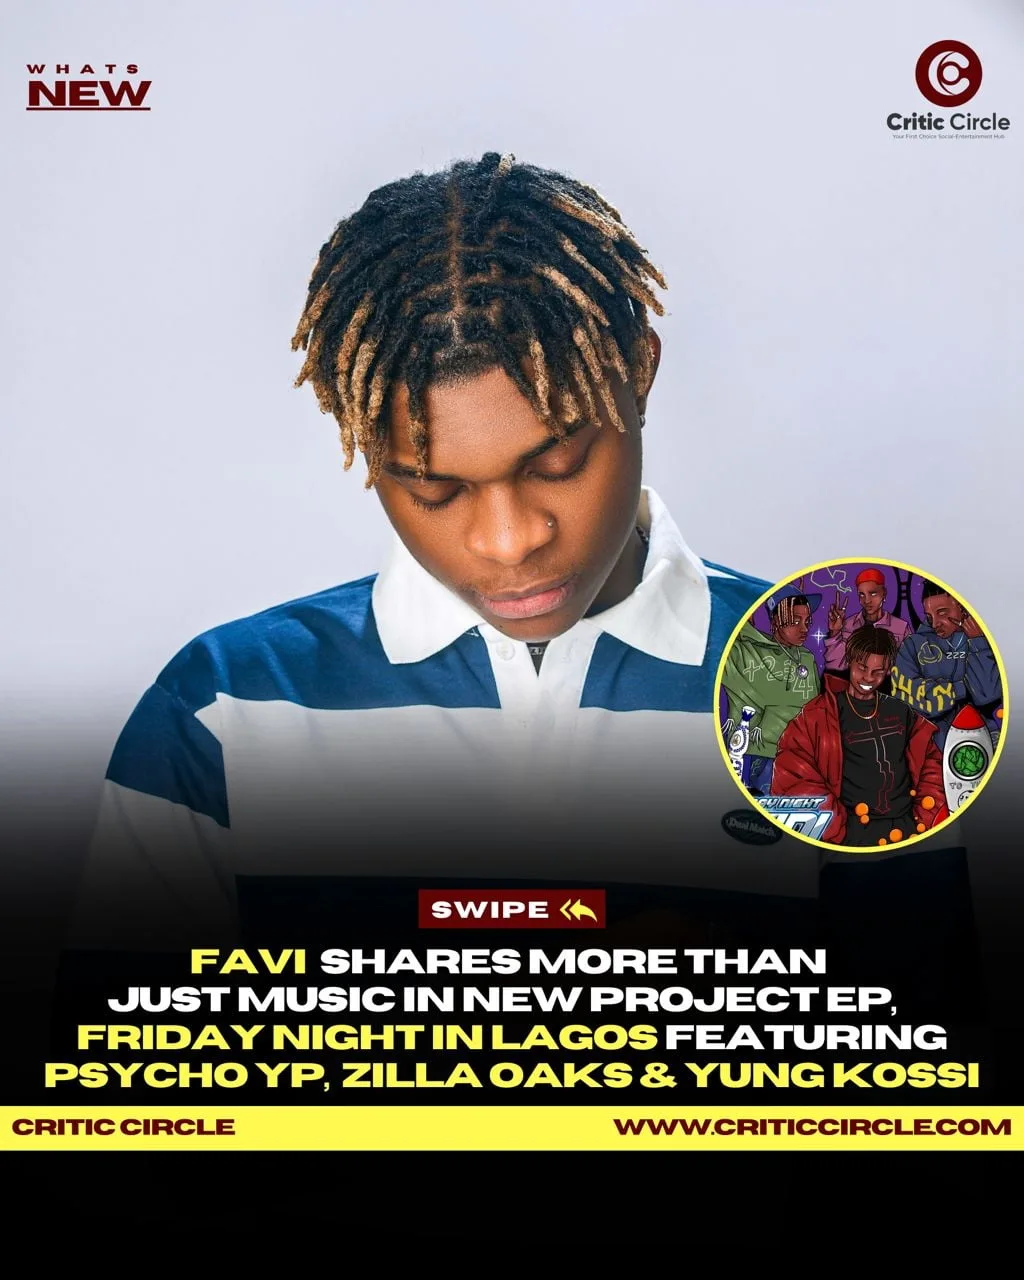 Favi Shares More Than Just Music In New Project EP, Friday Night In Lagos Featuring Psycho YP, Zilla Oaks & Yung Kossi ﻿